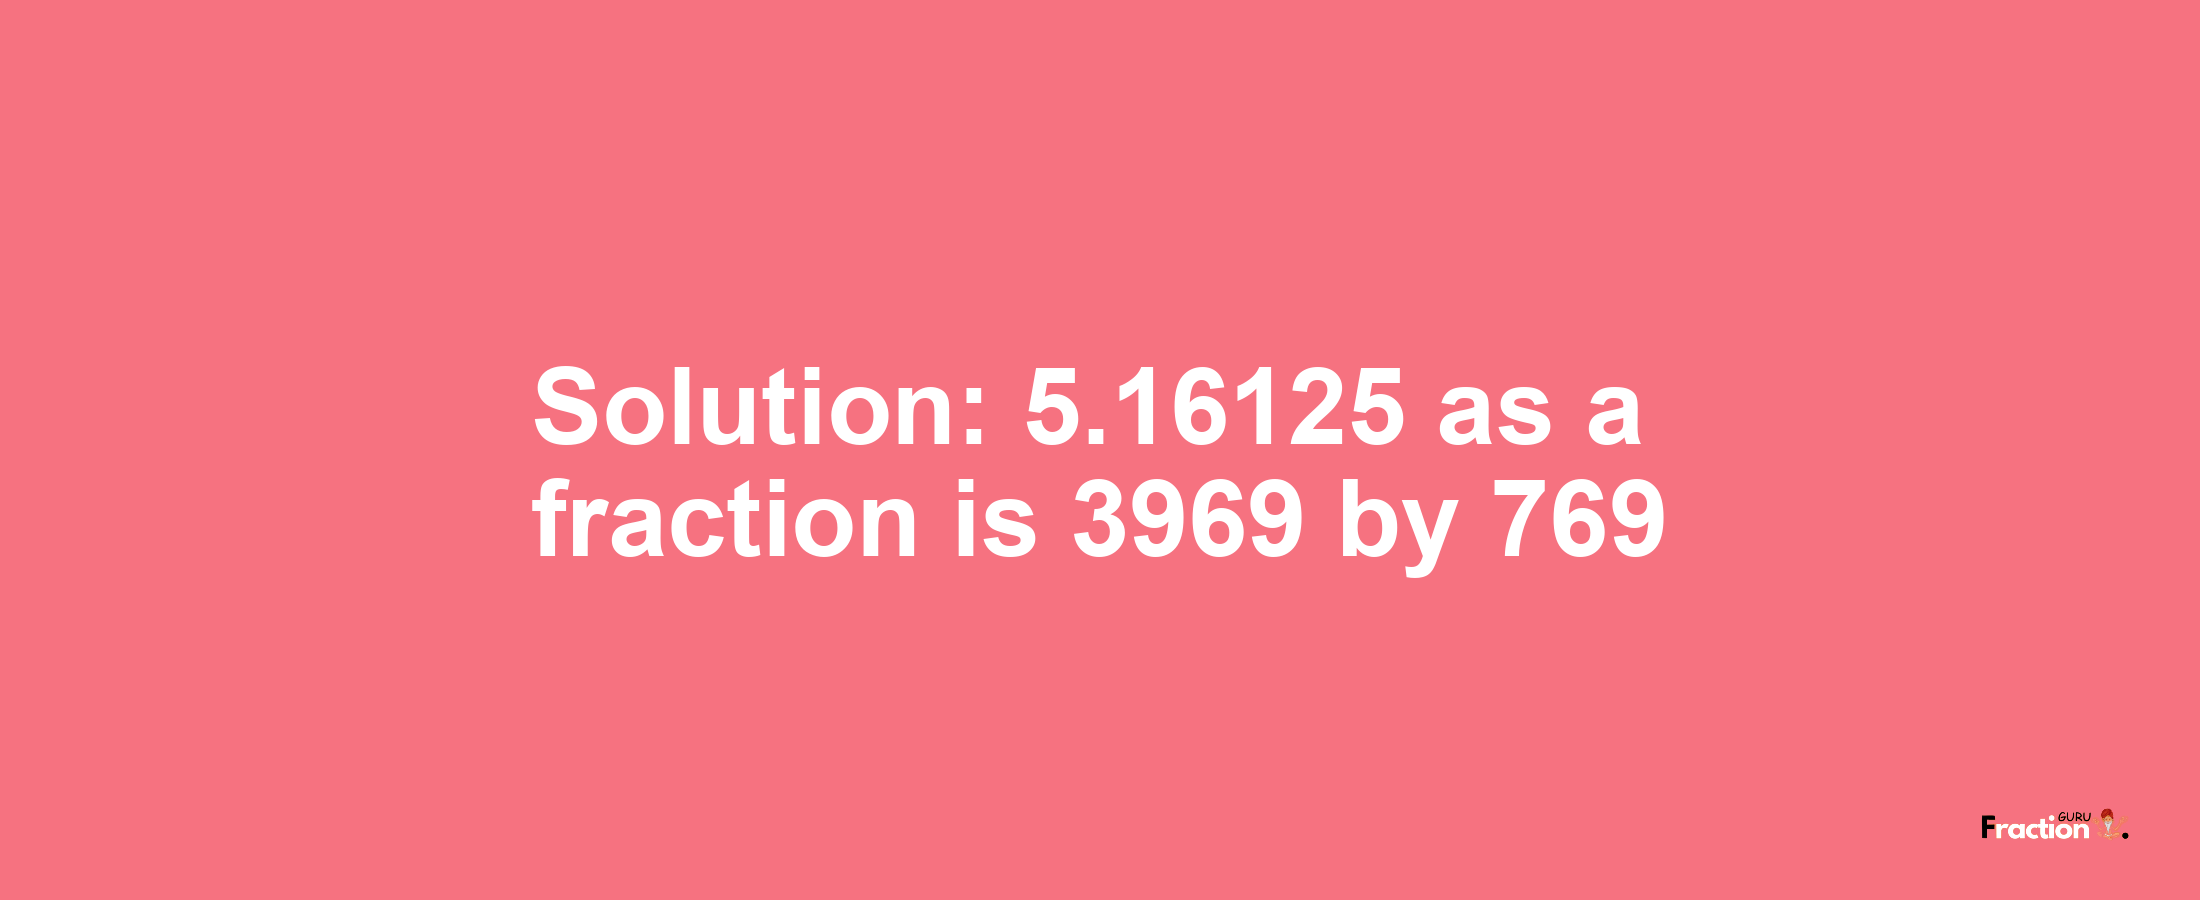 Solution:5.16125 as a fraction is 3969/769